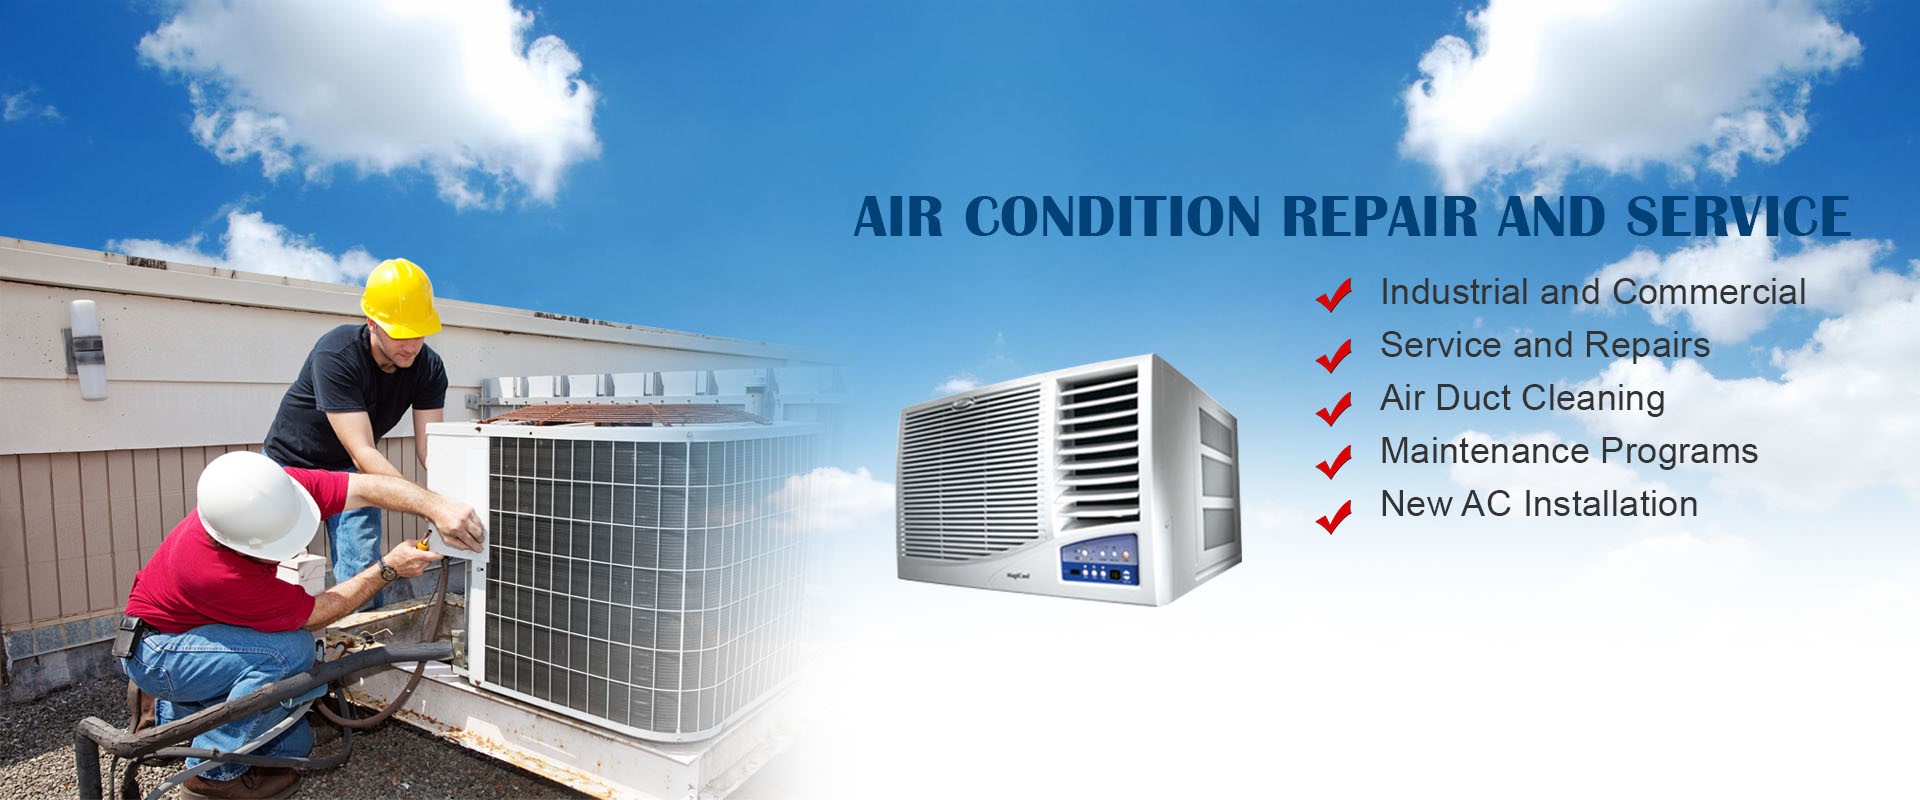 Heating And Air Conditioning Training School